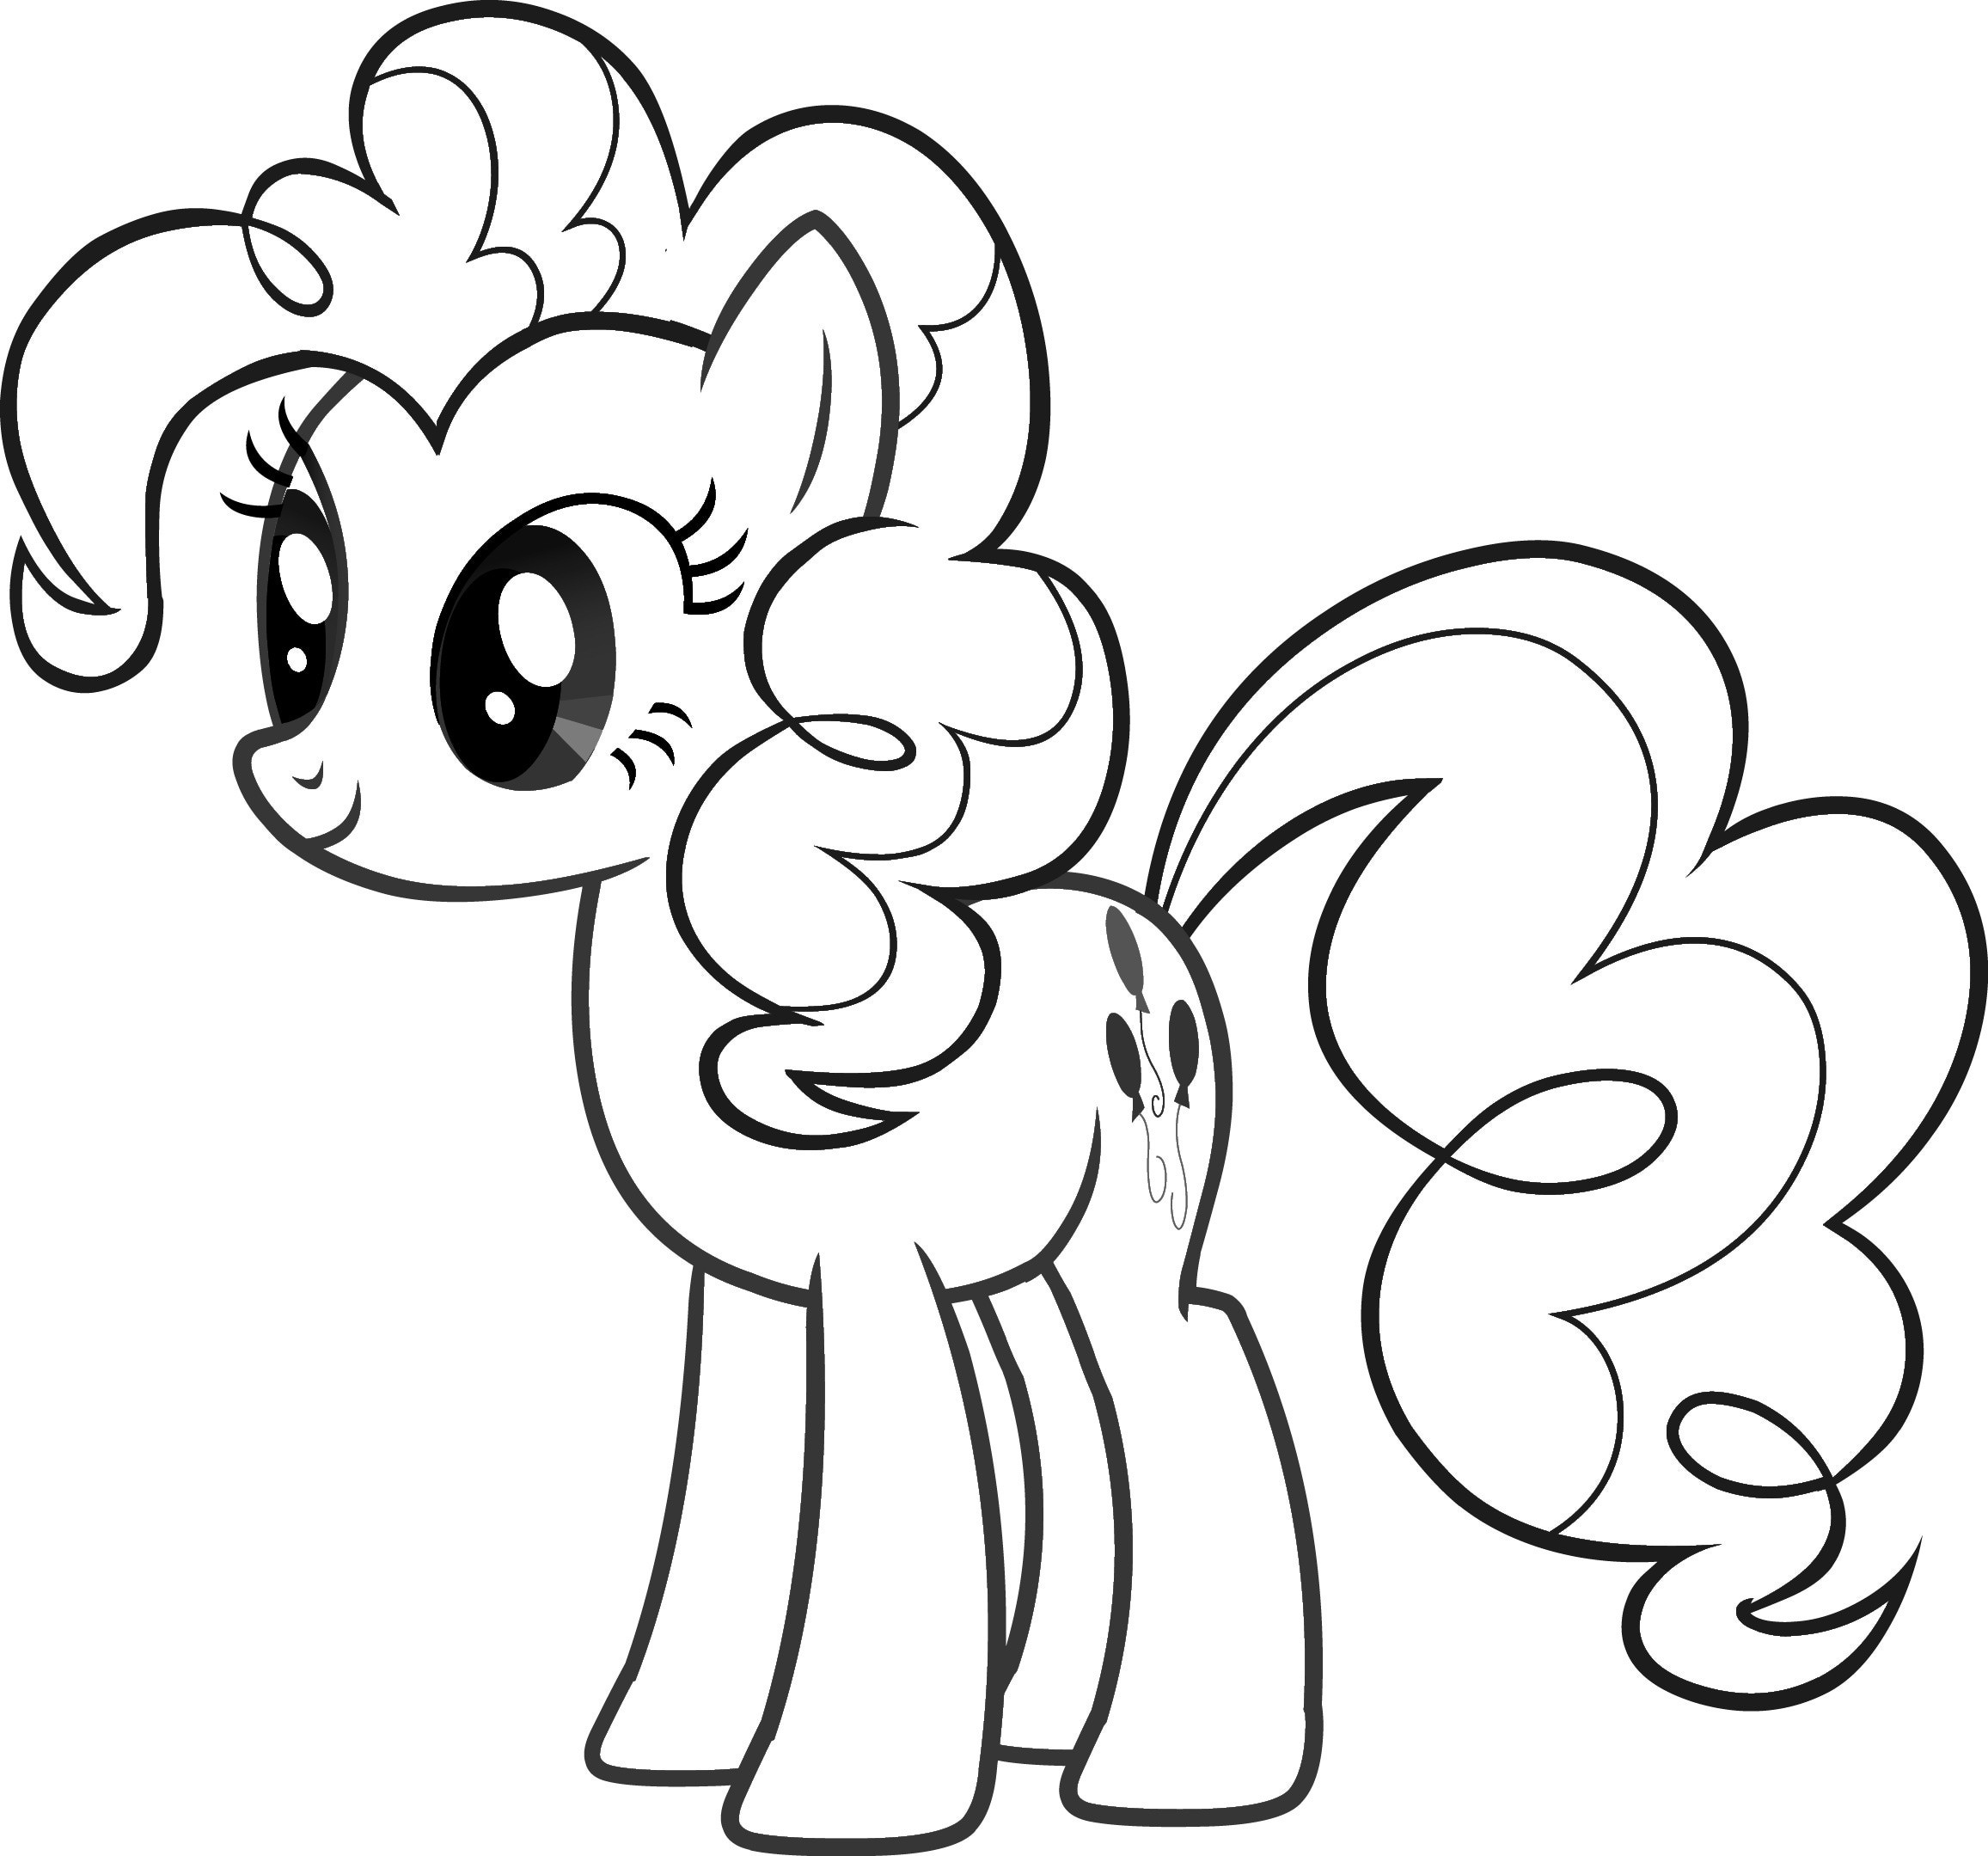 Free Girls Coloring Pages
 My little pony coloring pages